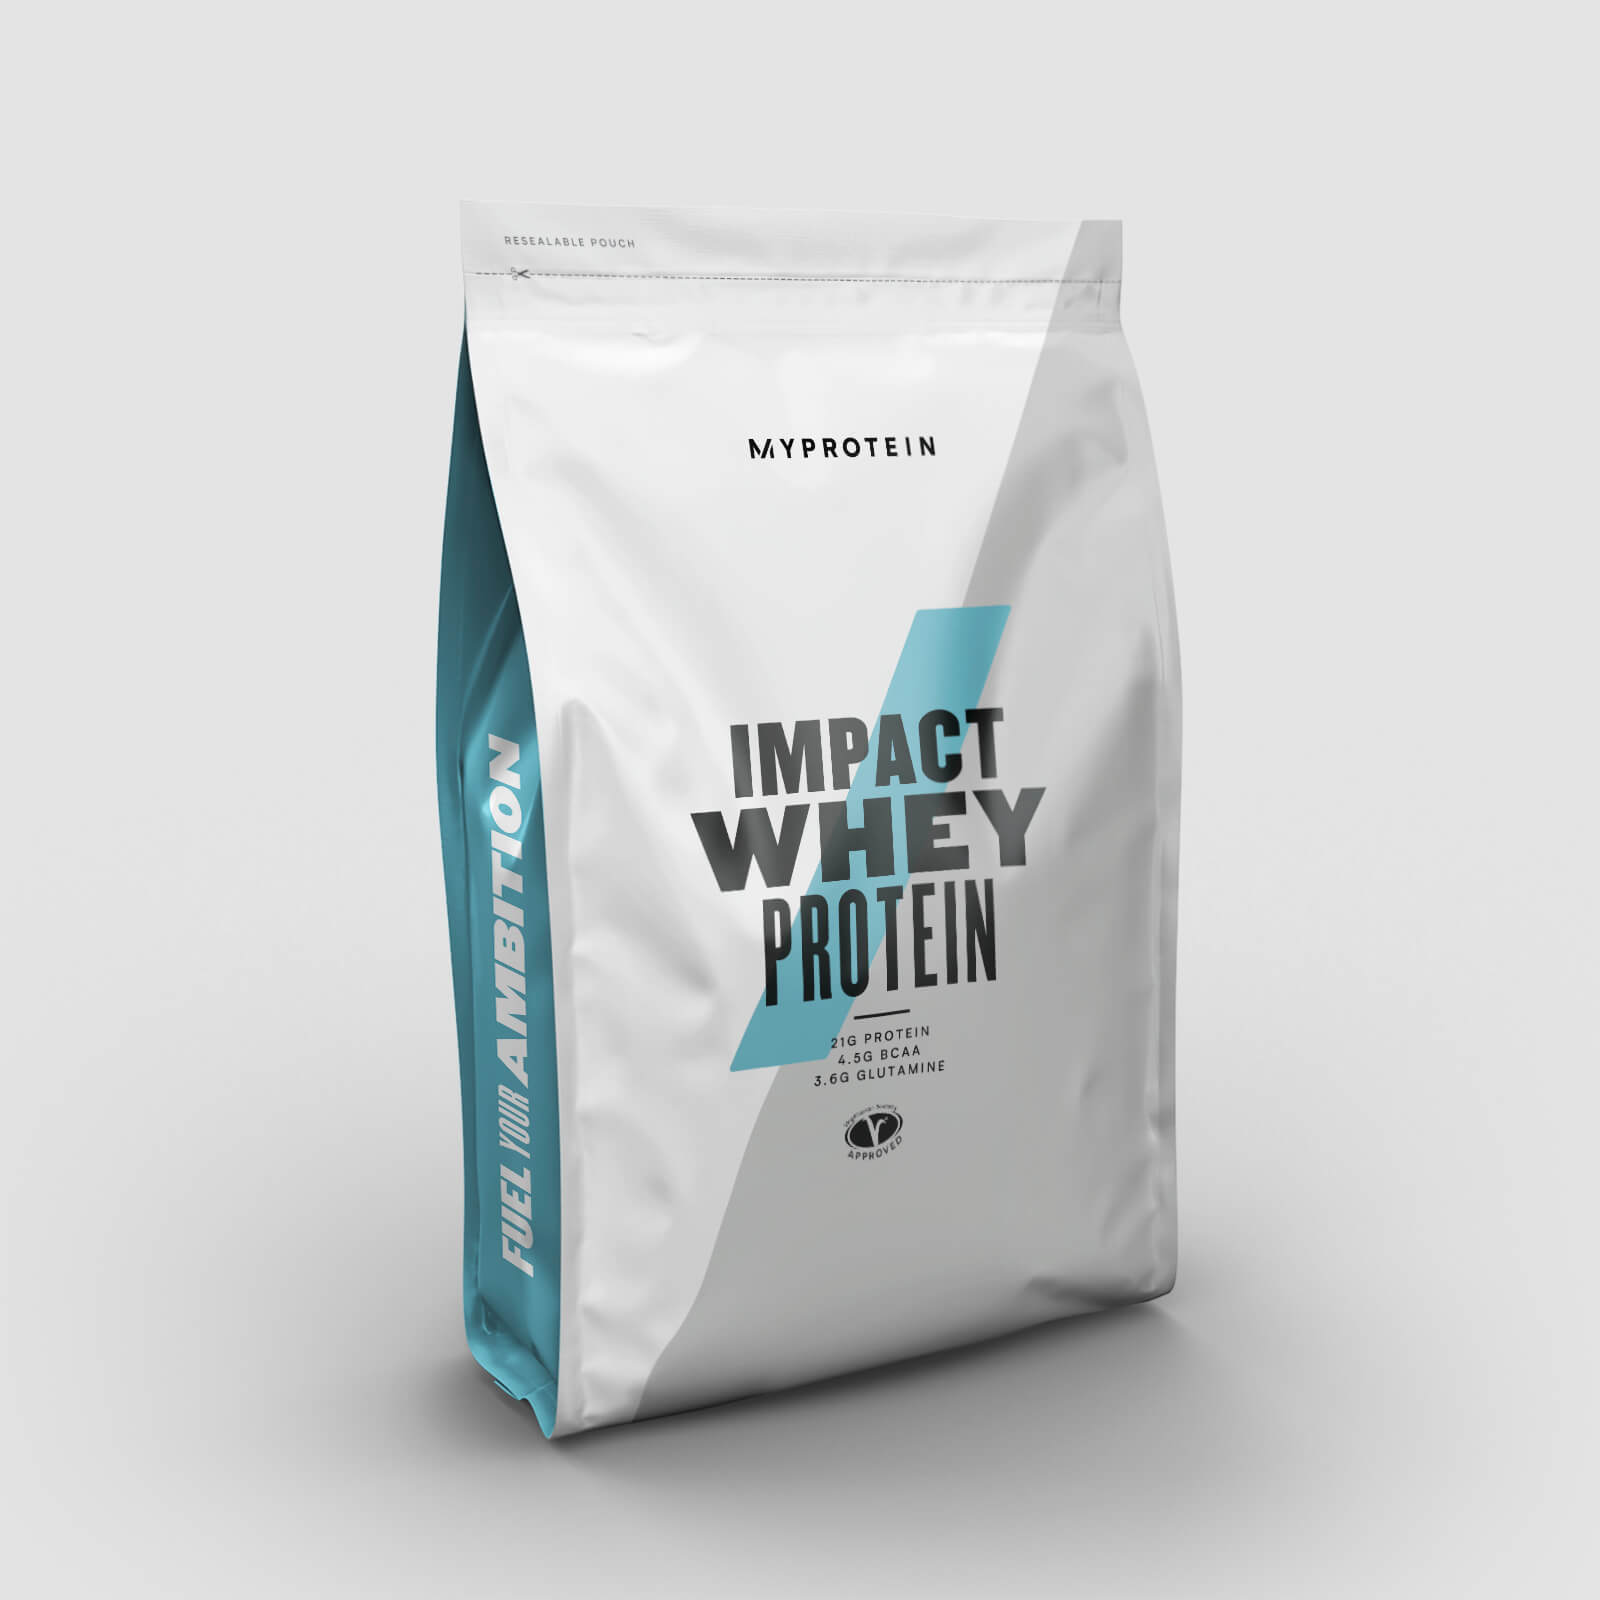 Myprotein Impact Whey | Use Code AMBITION for 35% Off | EatSleepGym